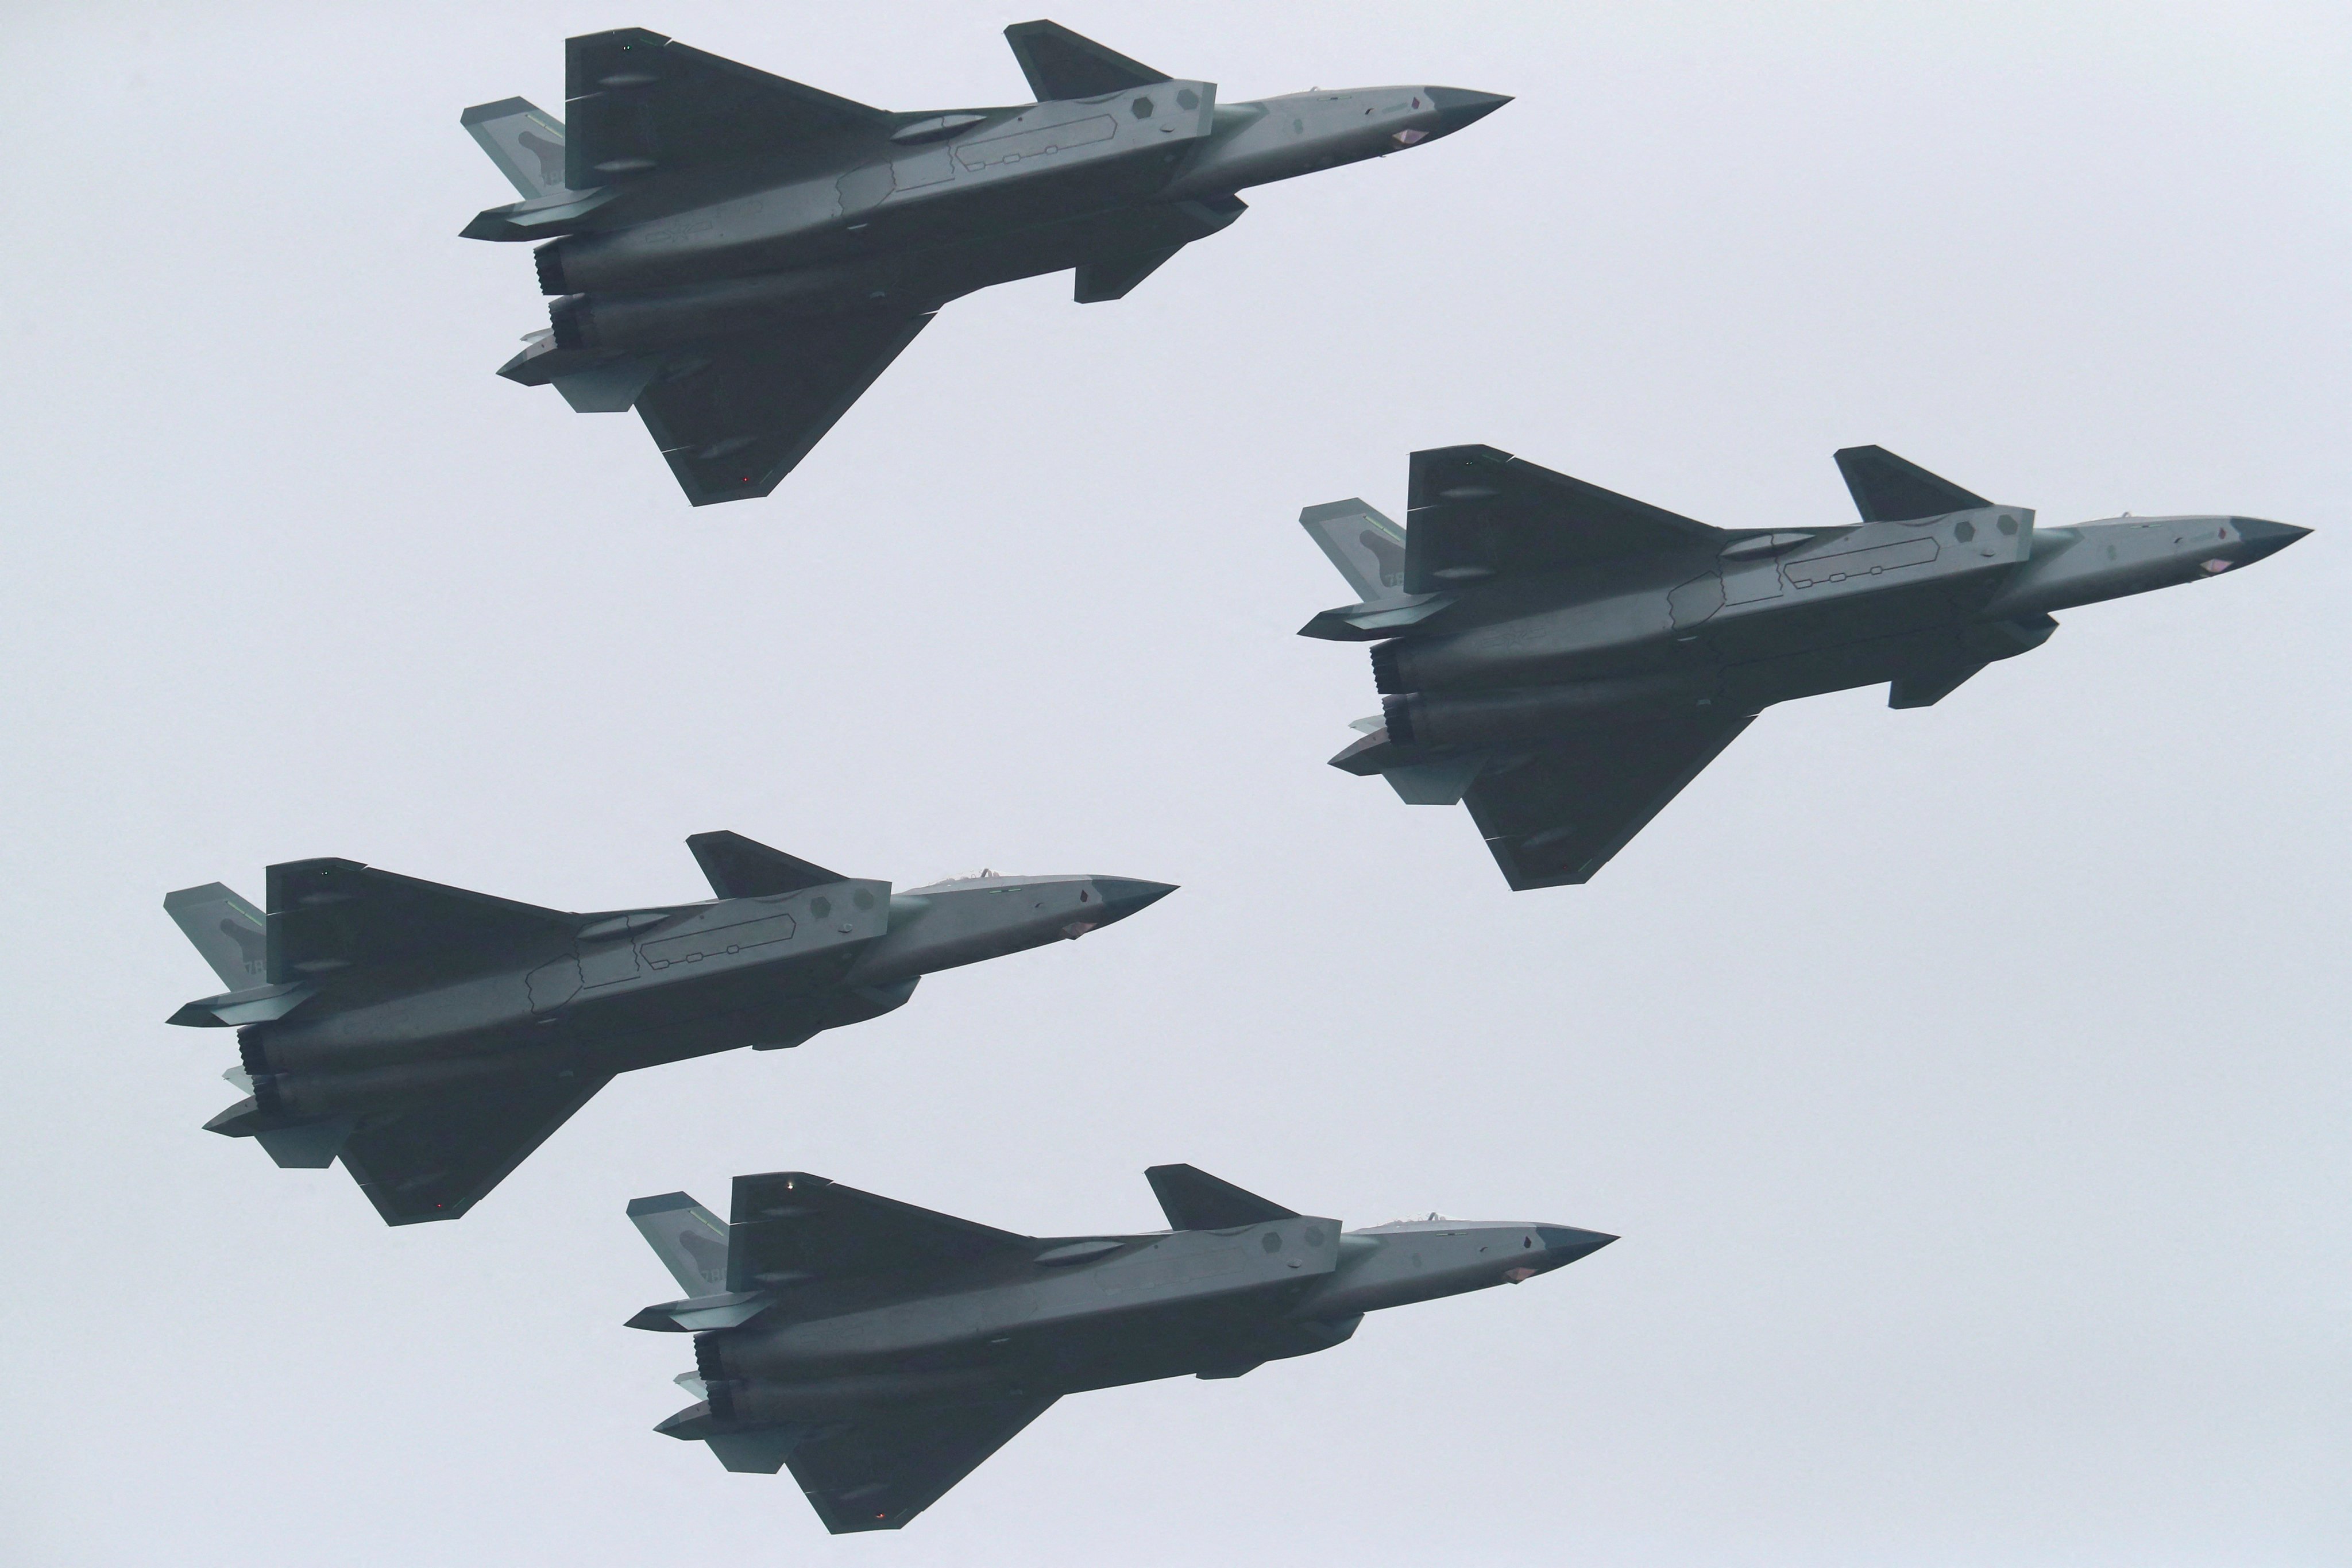 J-20 stealth fighter jets fly in formation at the Zhuhai air show in Guangdong on Tuesday. There will be more parking areas for fighter jets and other aircraft at an expanded base in the province. Photo: China Daily via Reuters